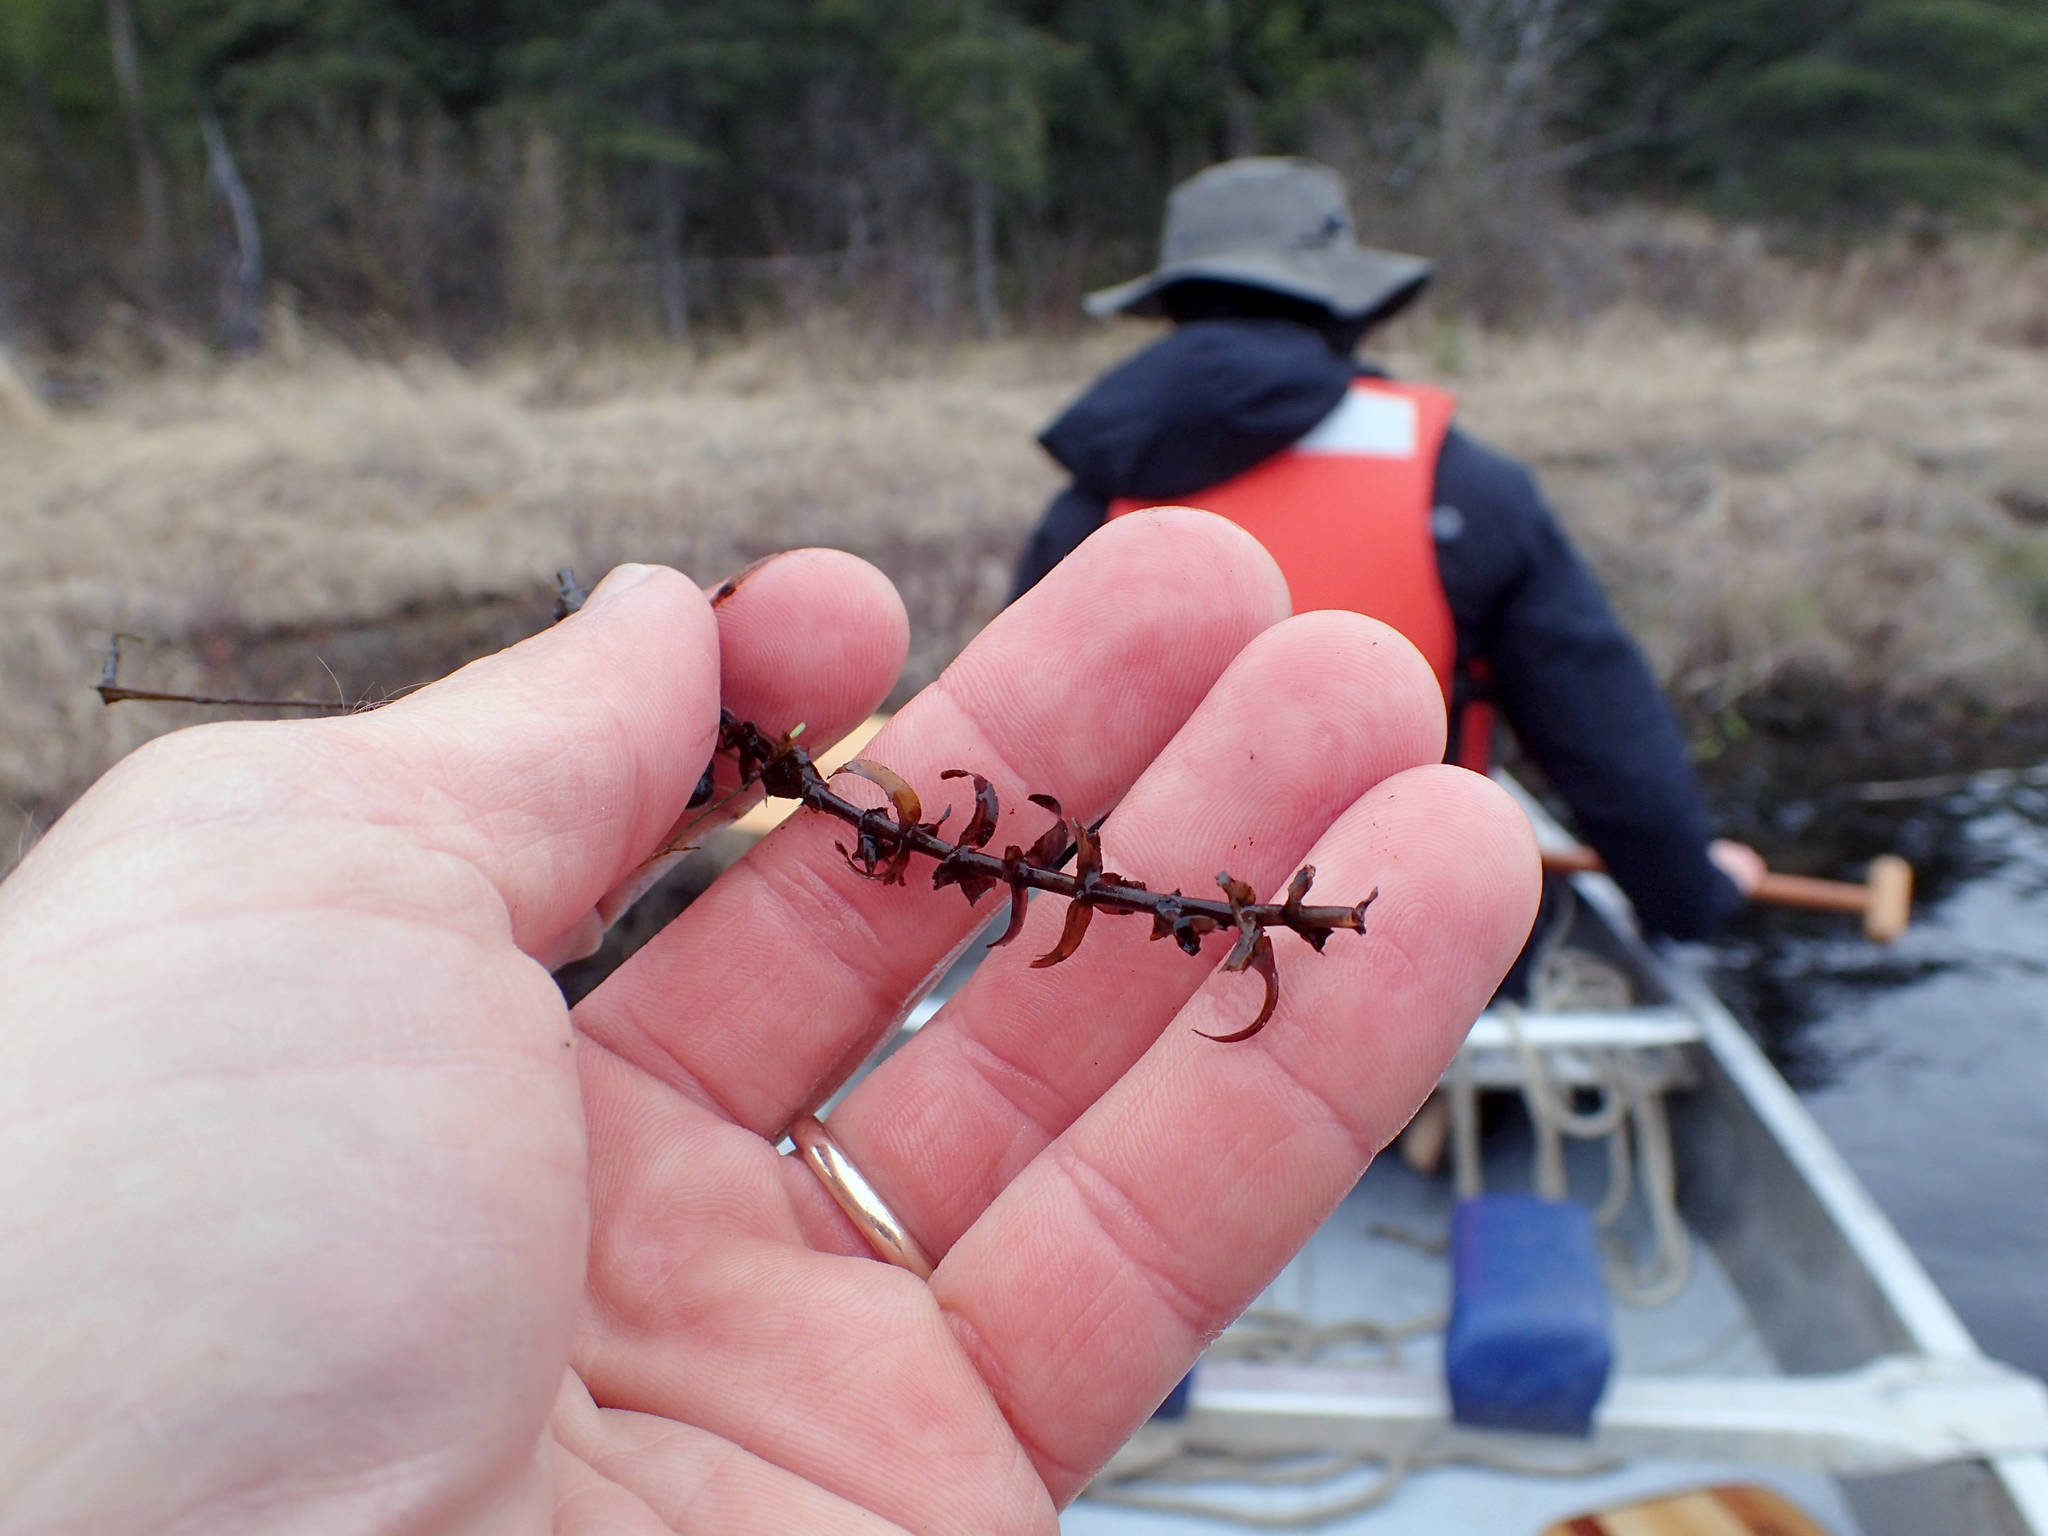 The last strand of elodea on the Kenai Peninsula was found during a survey in May 2019. This fragment is brown and brittle, signs of dying from having been treated with herbicide since 2017. (Photo by Matt Bowser/Kenai National Wildlife Refuge).